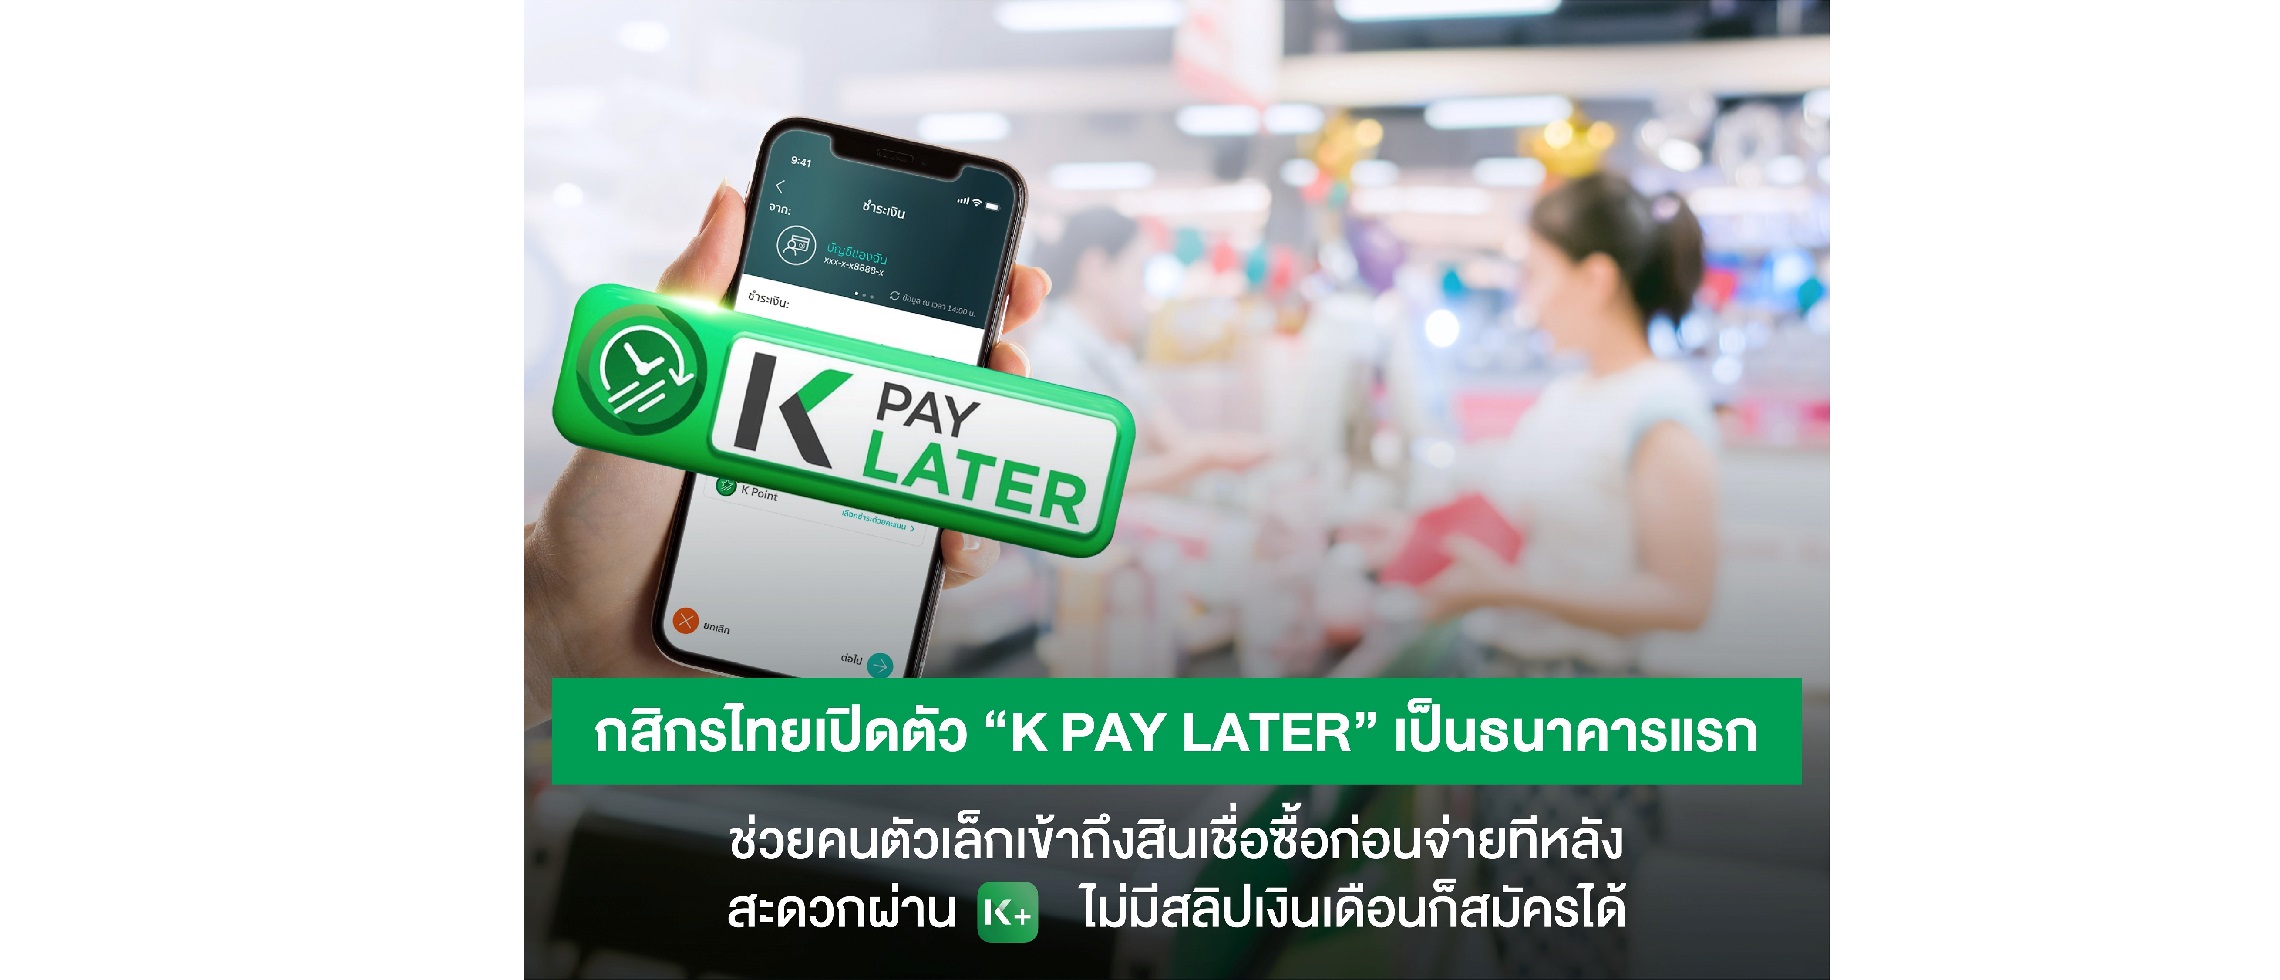 K PAY LATER launches BNPL/loan offer for Thai unbanked and underbanked